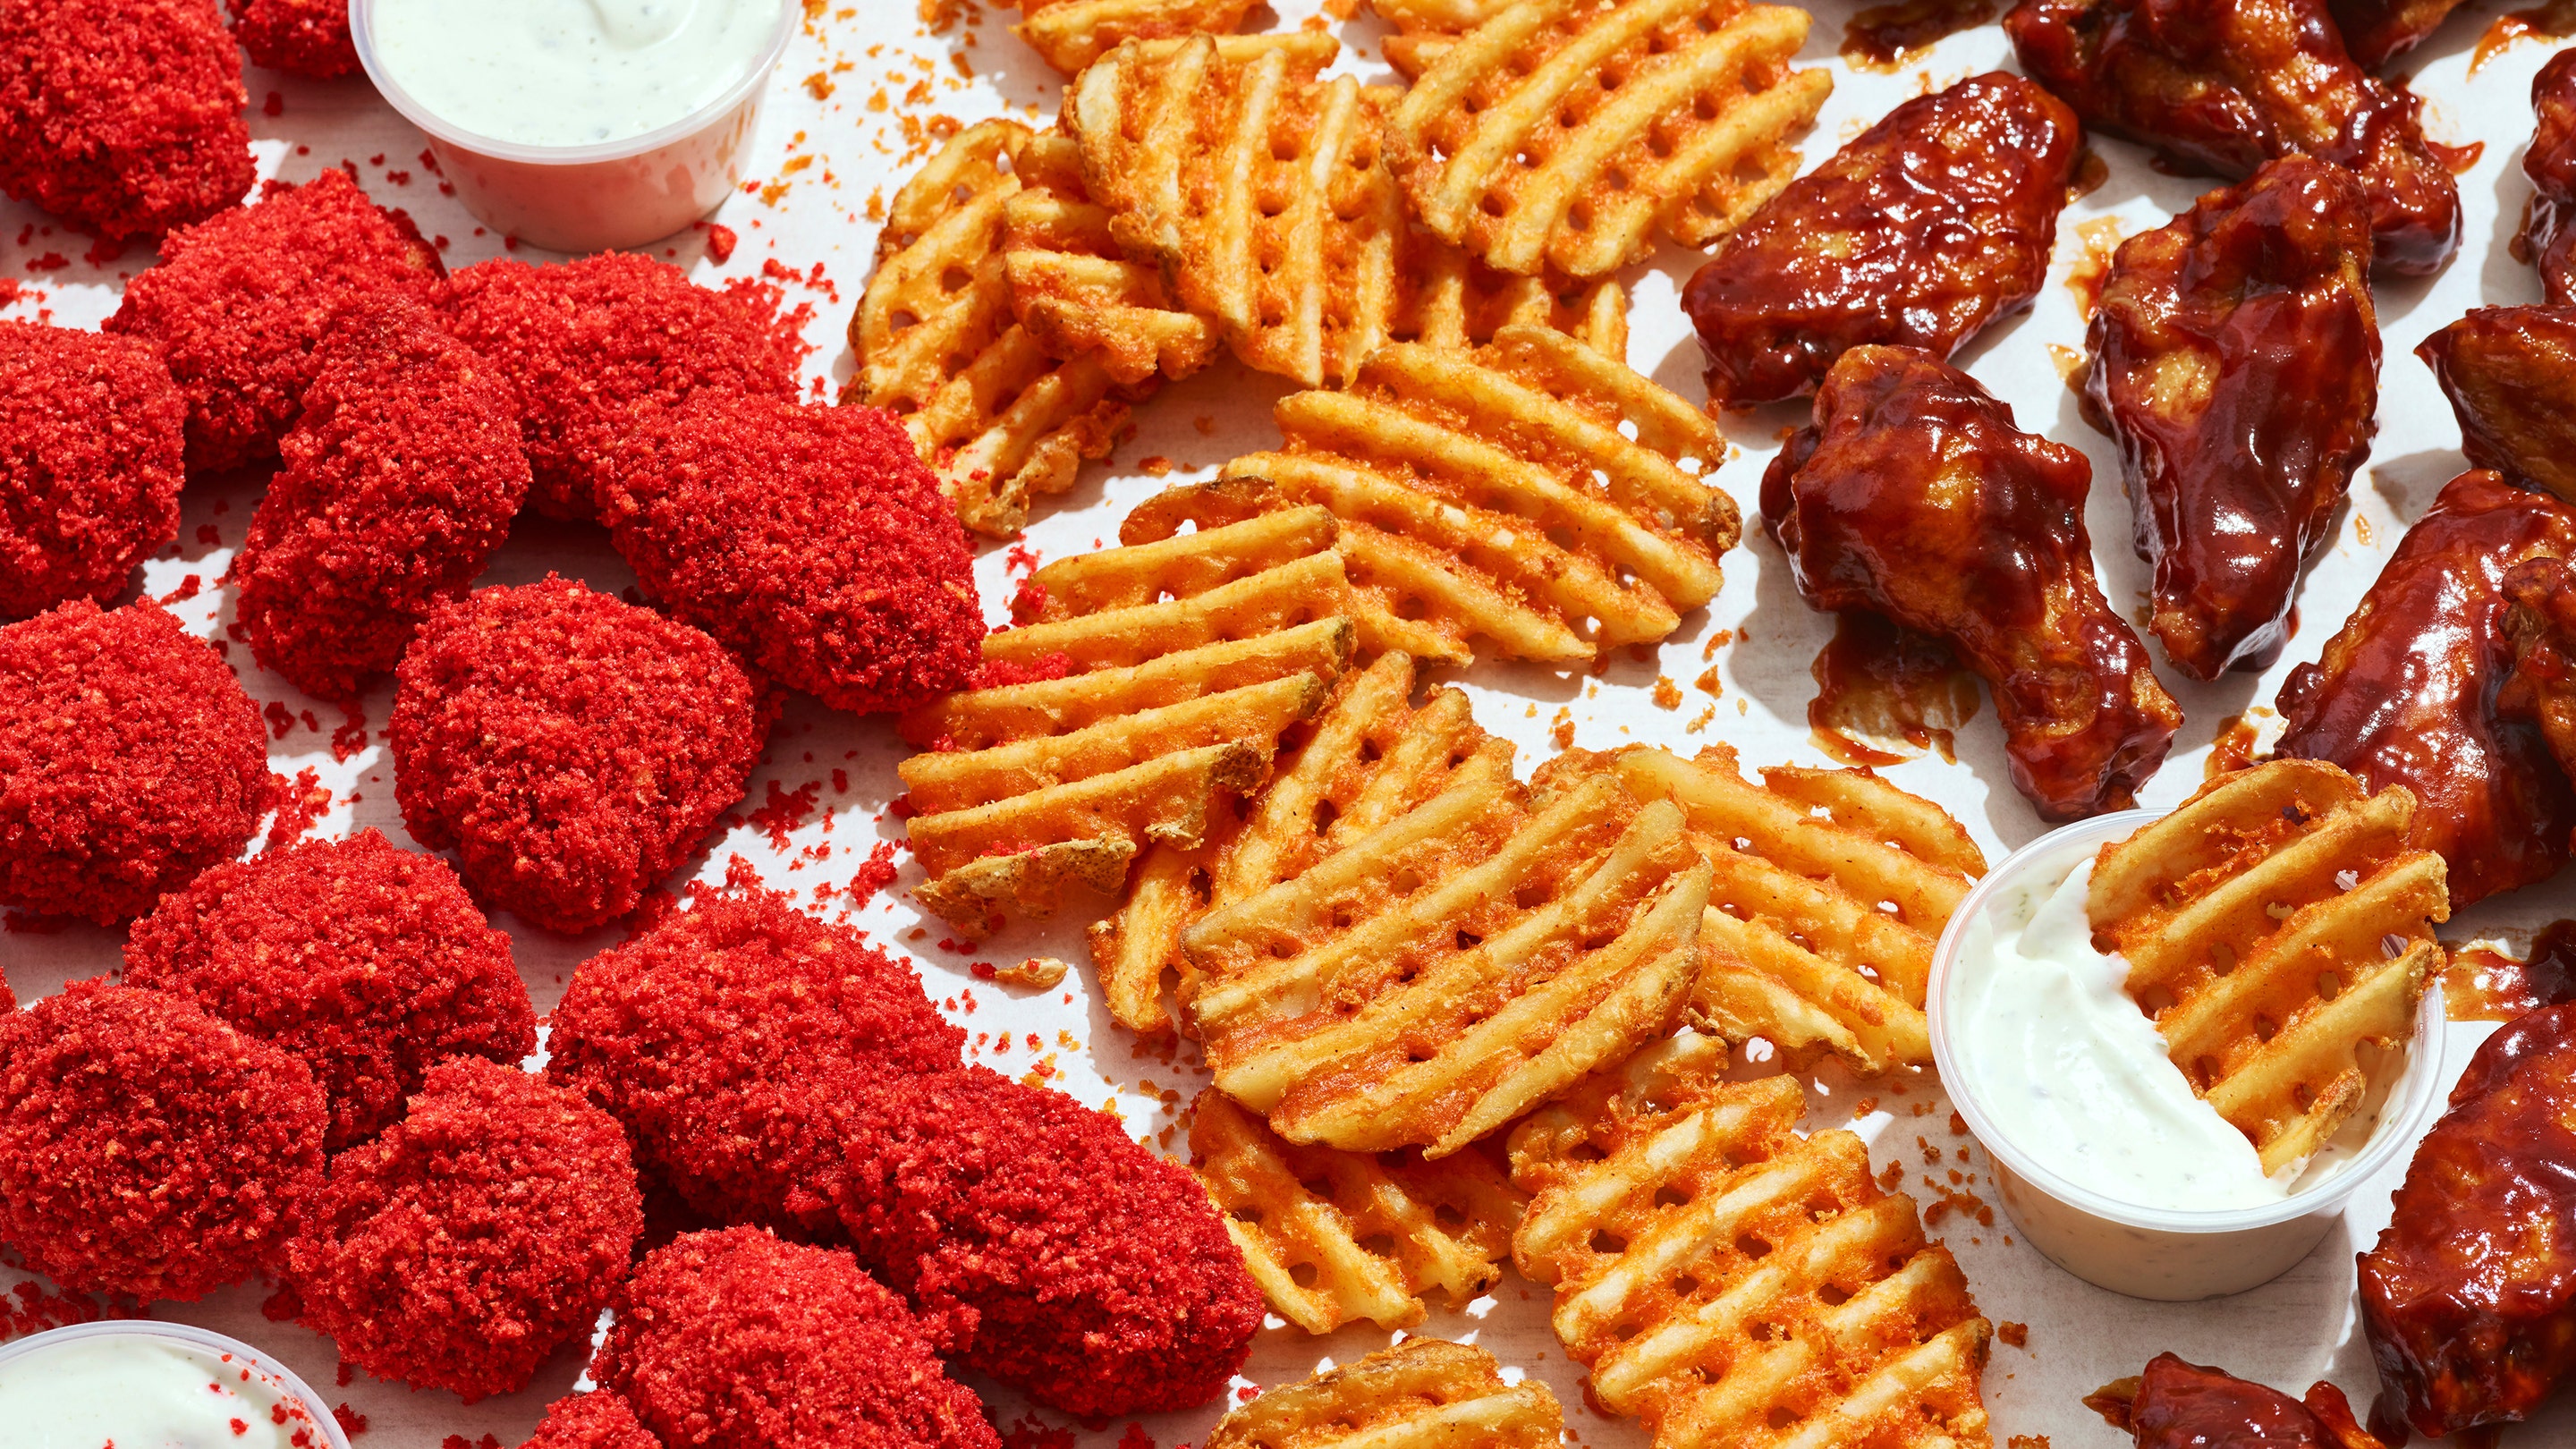 Applebee’s new virtual kitchen sells Cheetos flavored wings